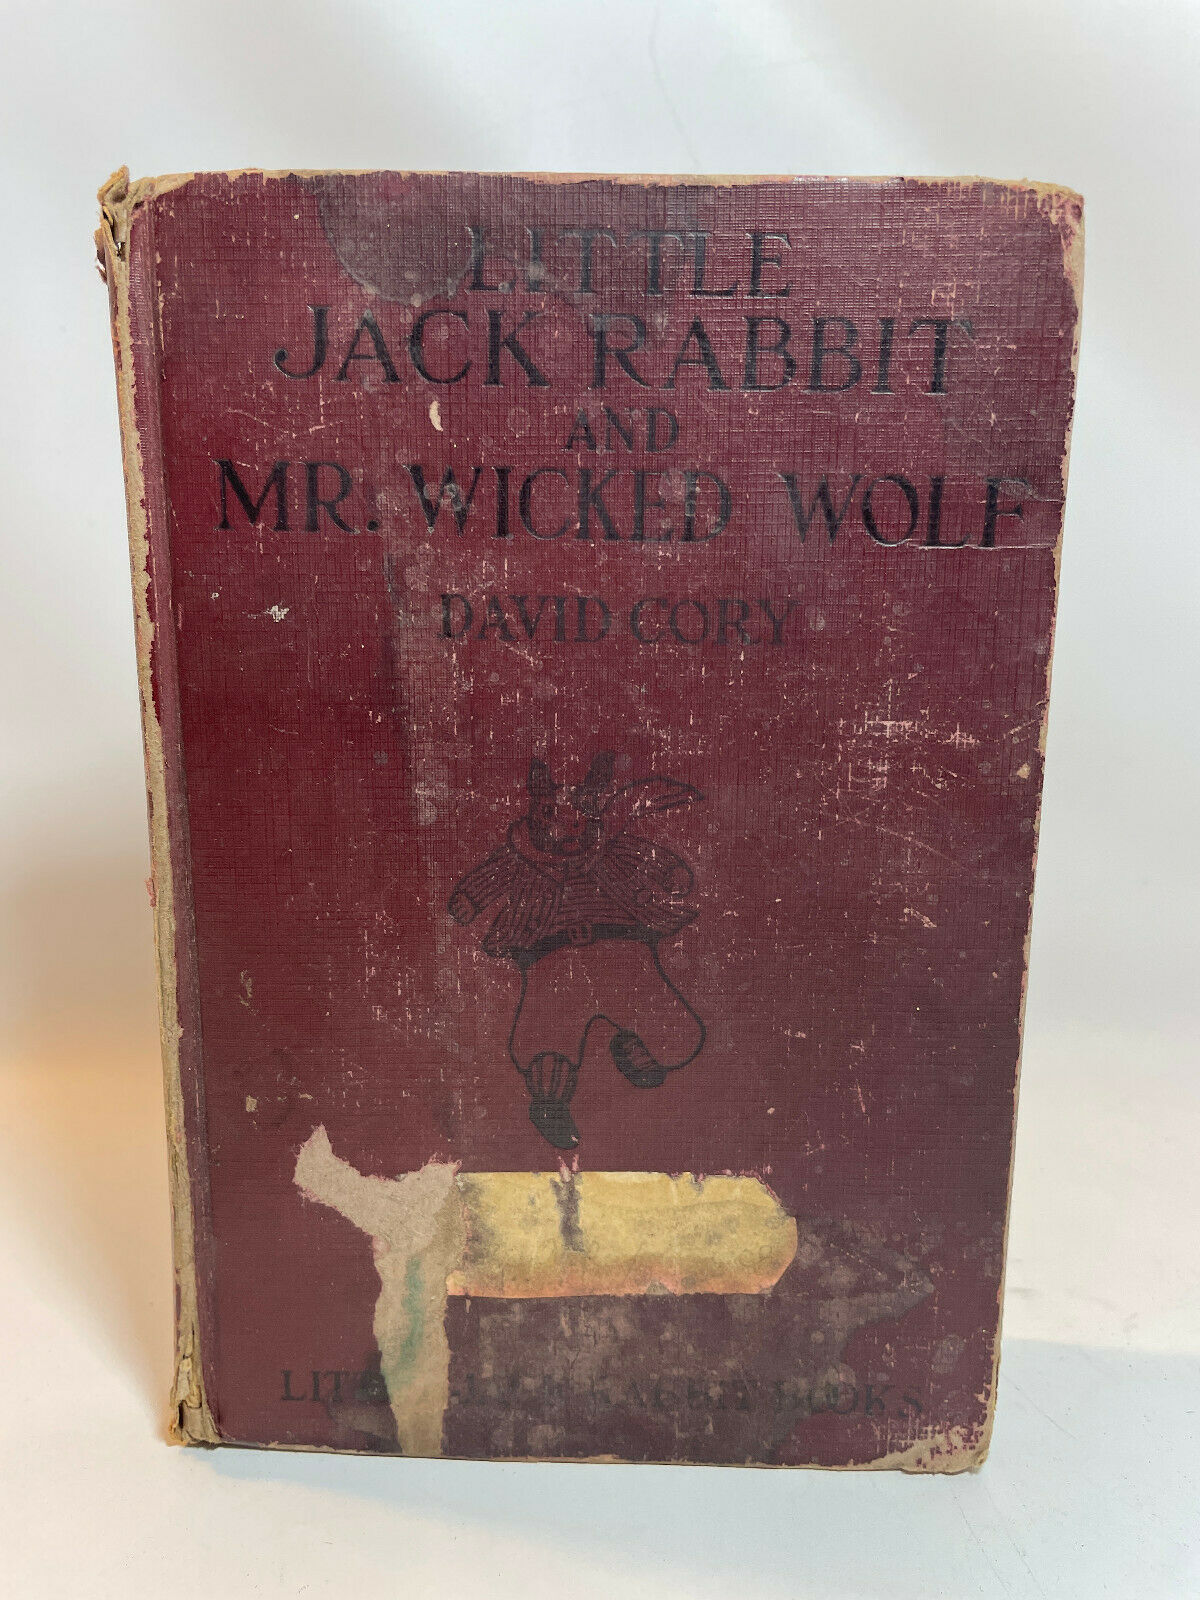 Little Jack Rabbit and Mr. Wicked Wolf 1923 David Cory Illustrated (B2)